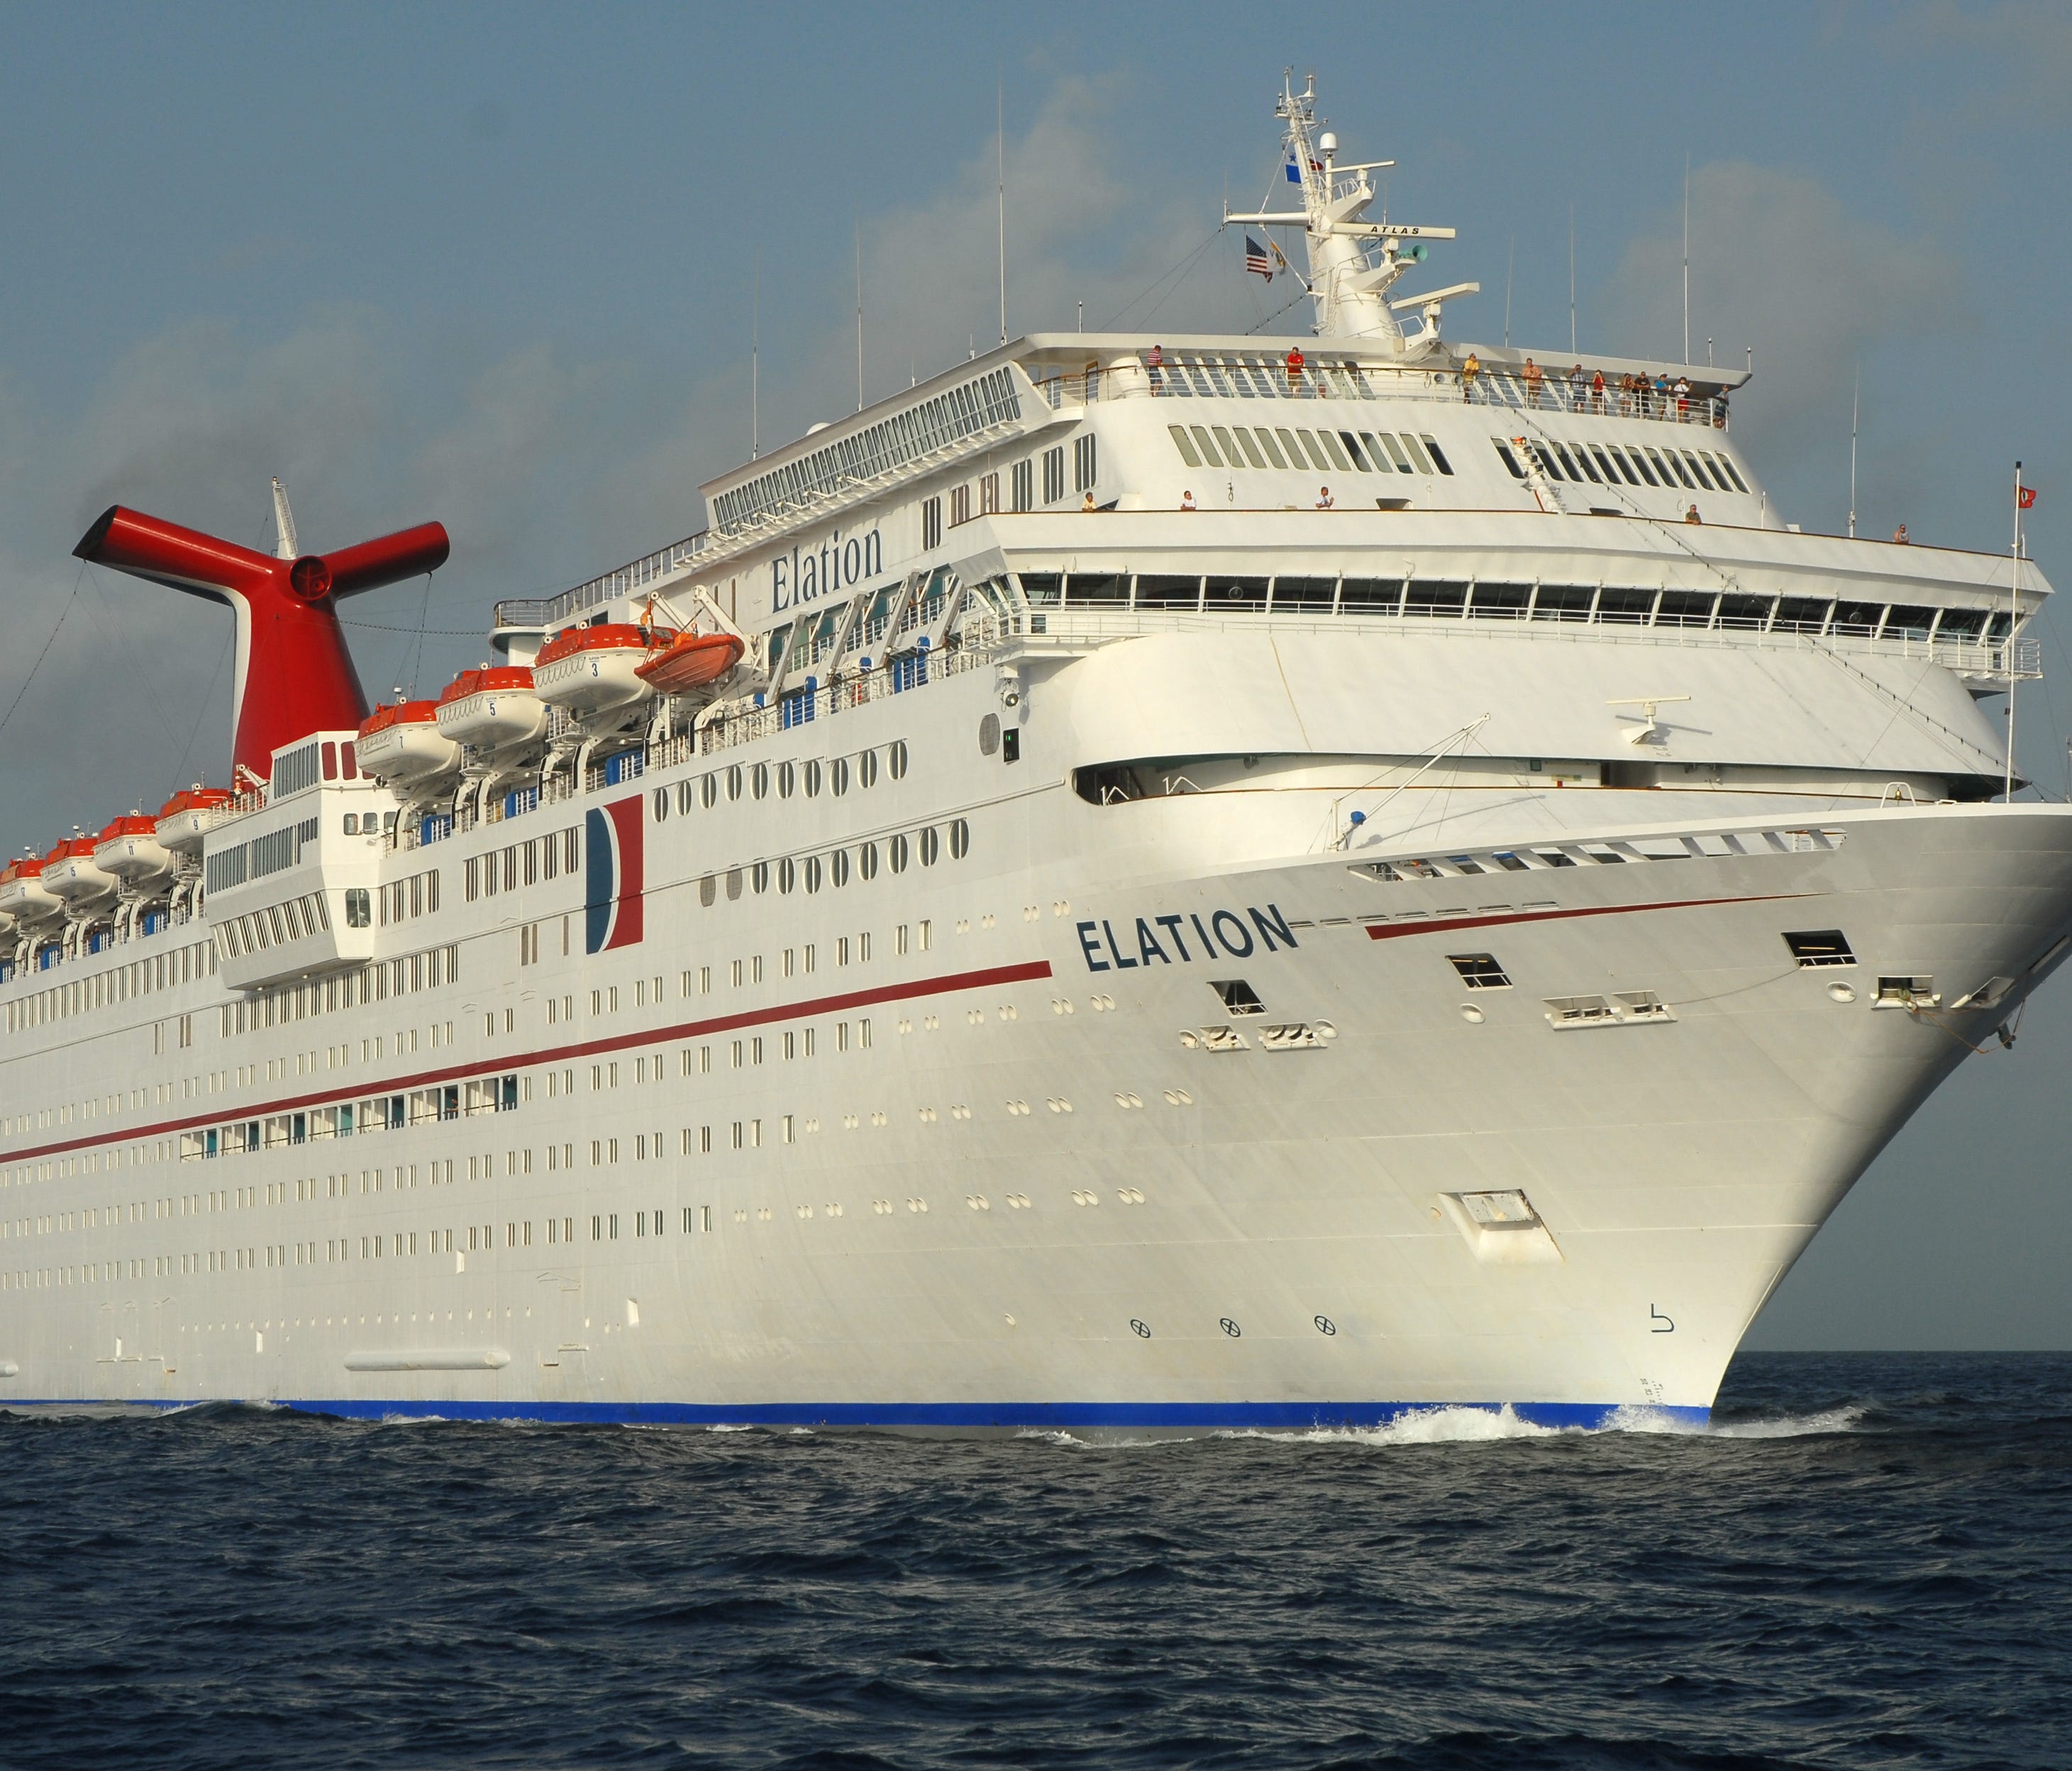 Carnival Cruise Lines' Elation cruises on the open ocean. The 2,052-passenger liner features 12 lounges and bars, three restaurants, three swimming pools and an Internet cafe. The cruise liner operates year-round four- and five-day cruises to Baja, M